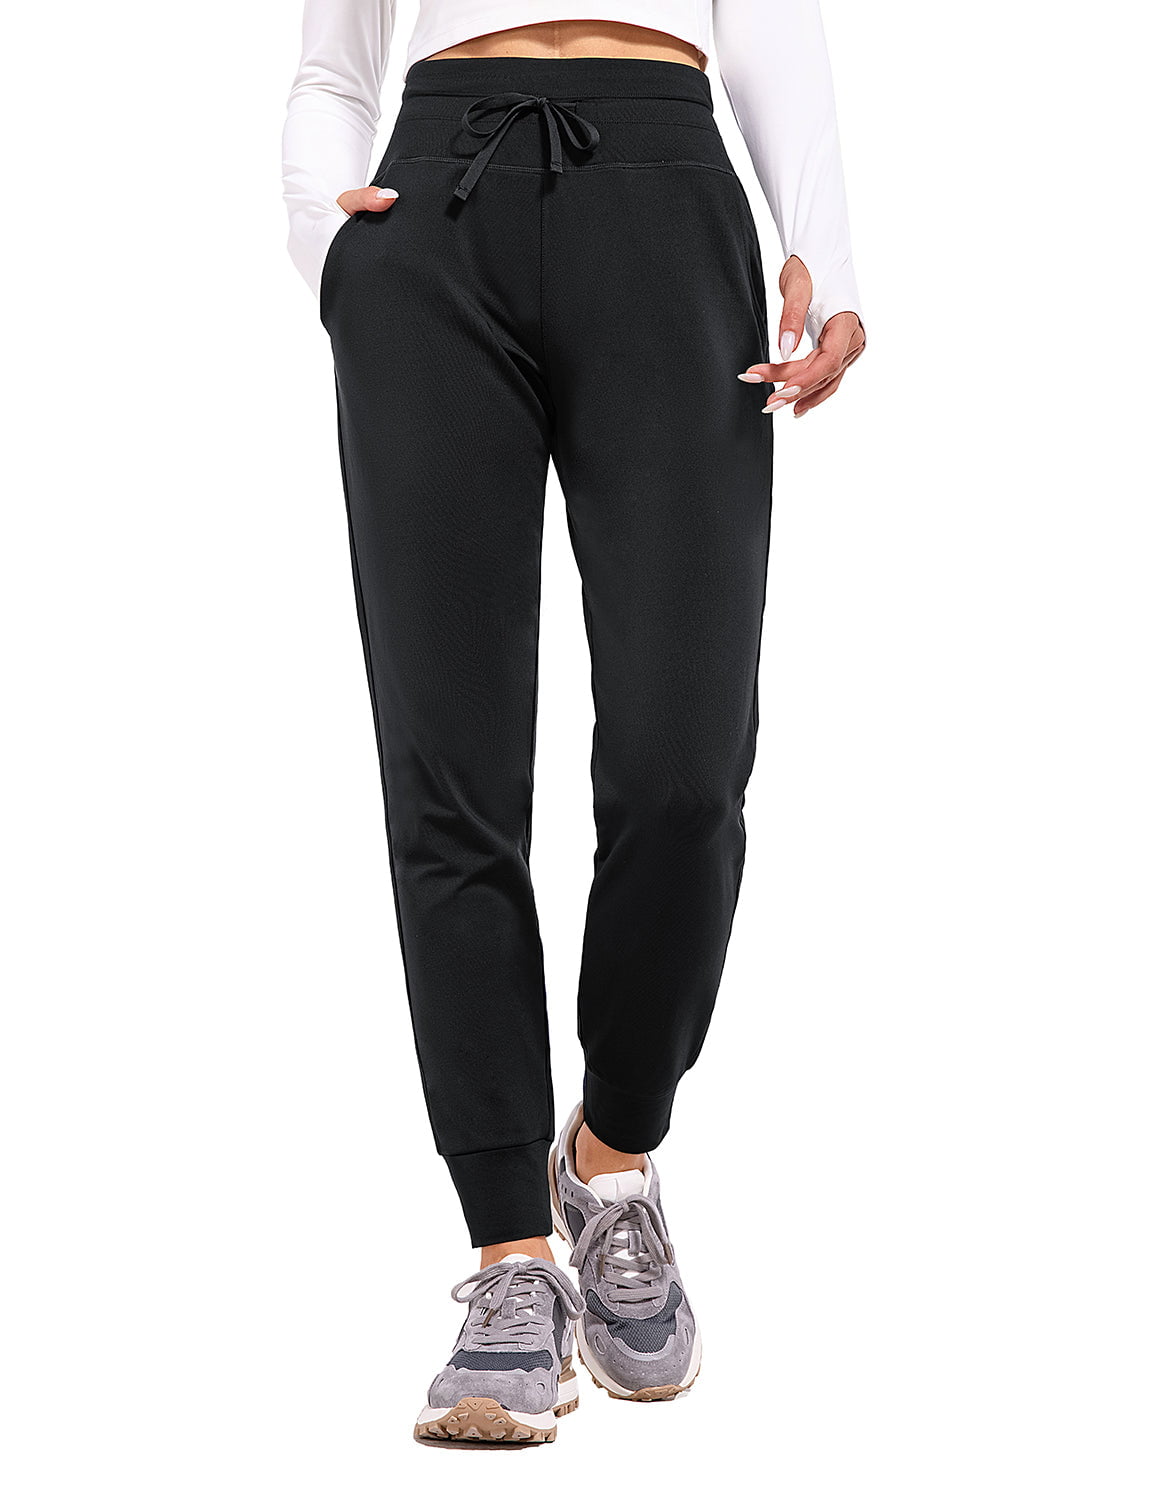 Thermal Winter XS High Pants BALEAF Water Fleece Running Waisted Black Lined Resistant Joggers Women\'s Hiking Pockets Sweatpants